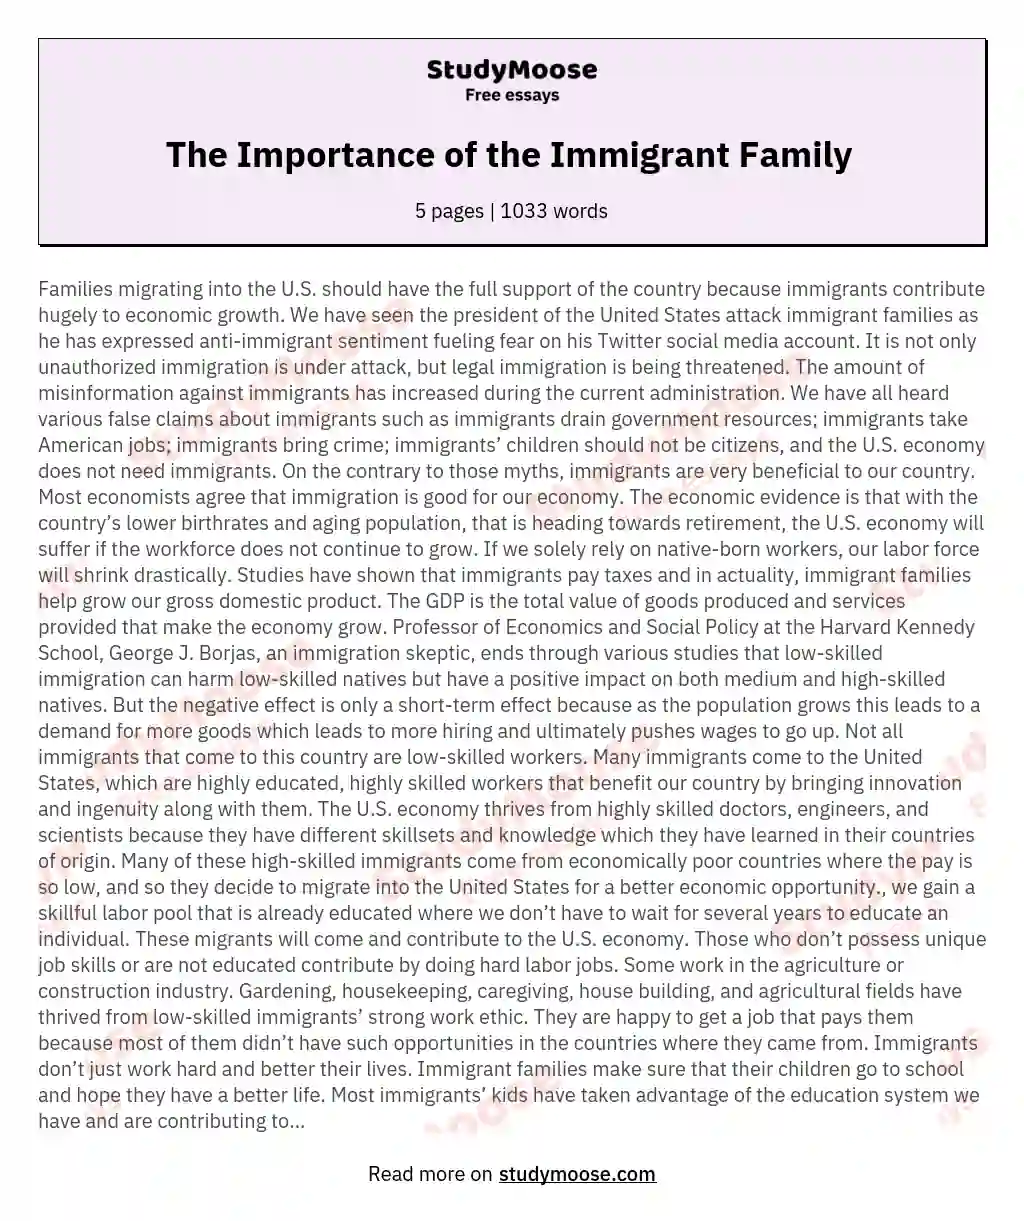 The Importance of the Immigrant Family  essay